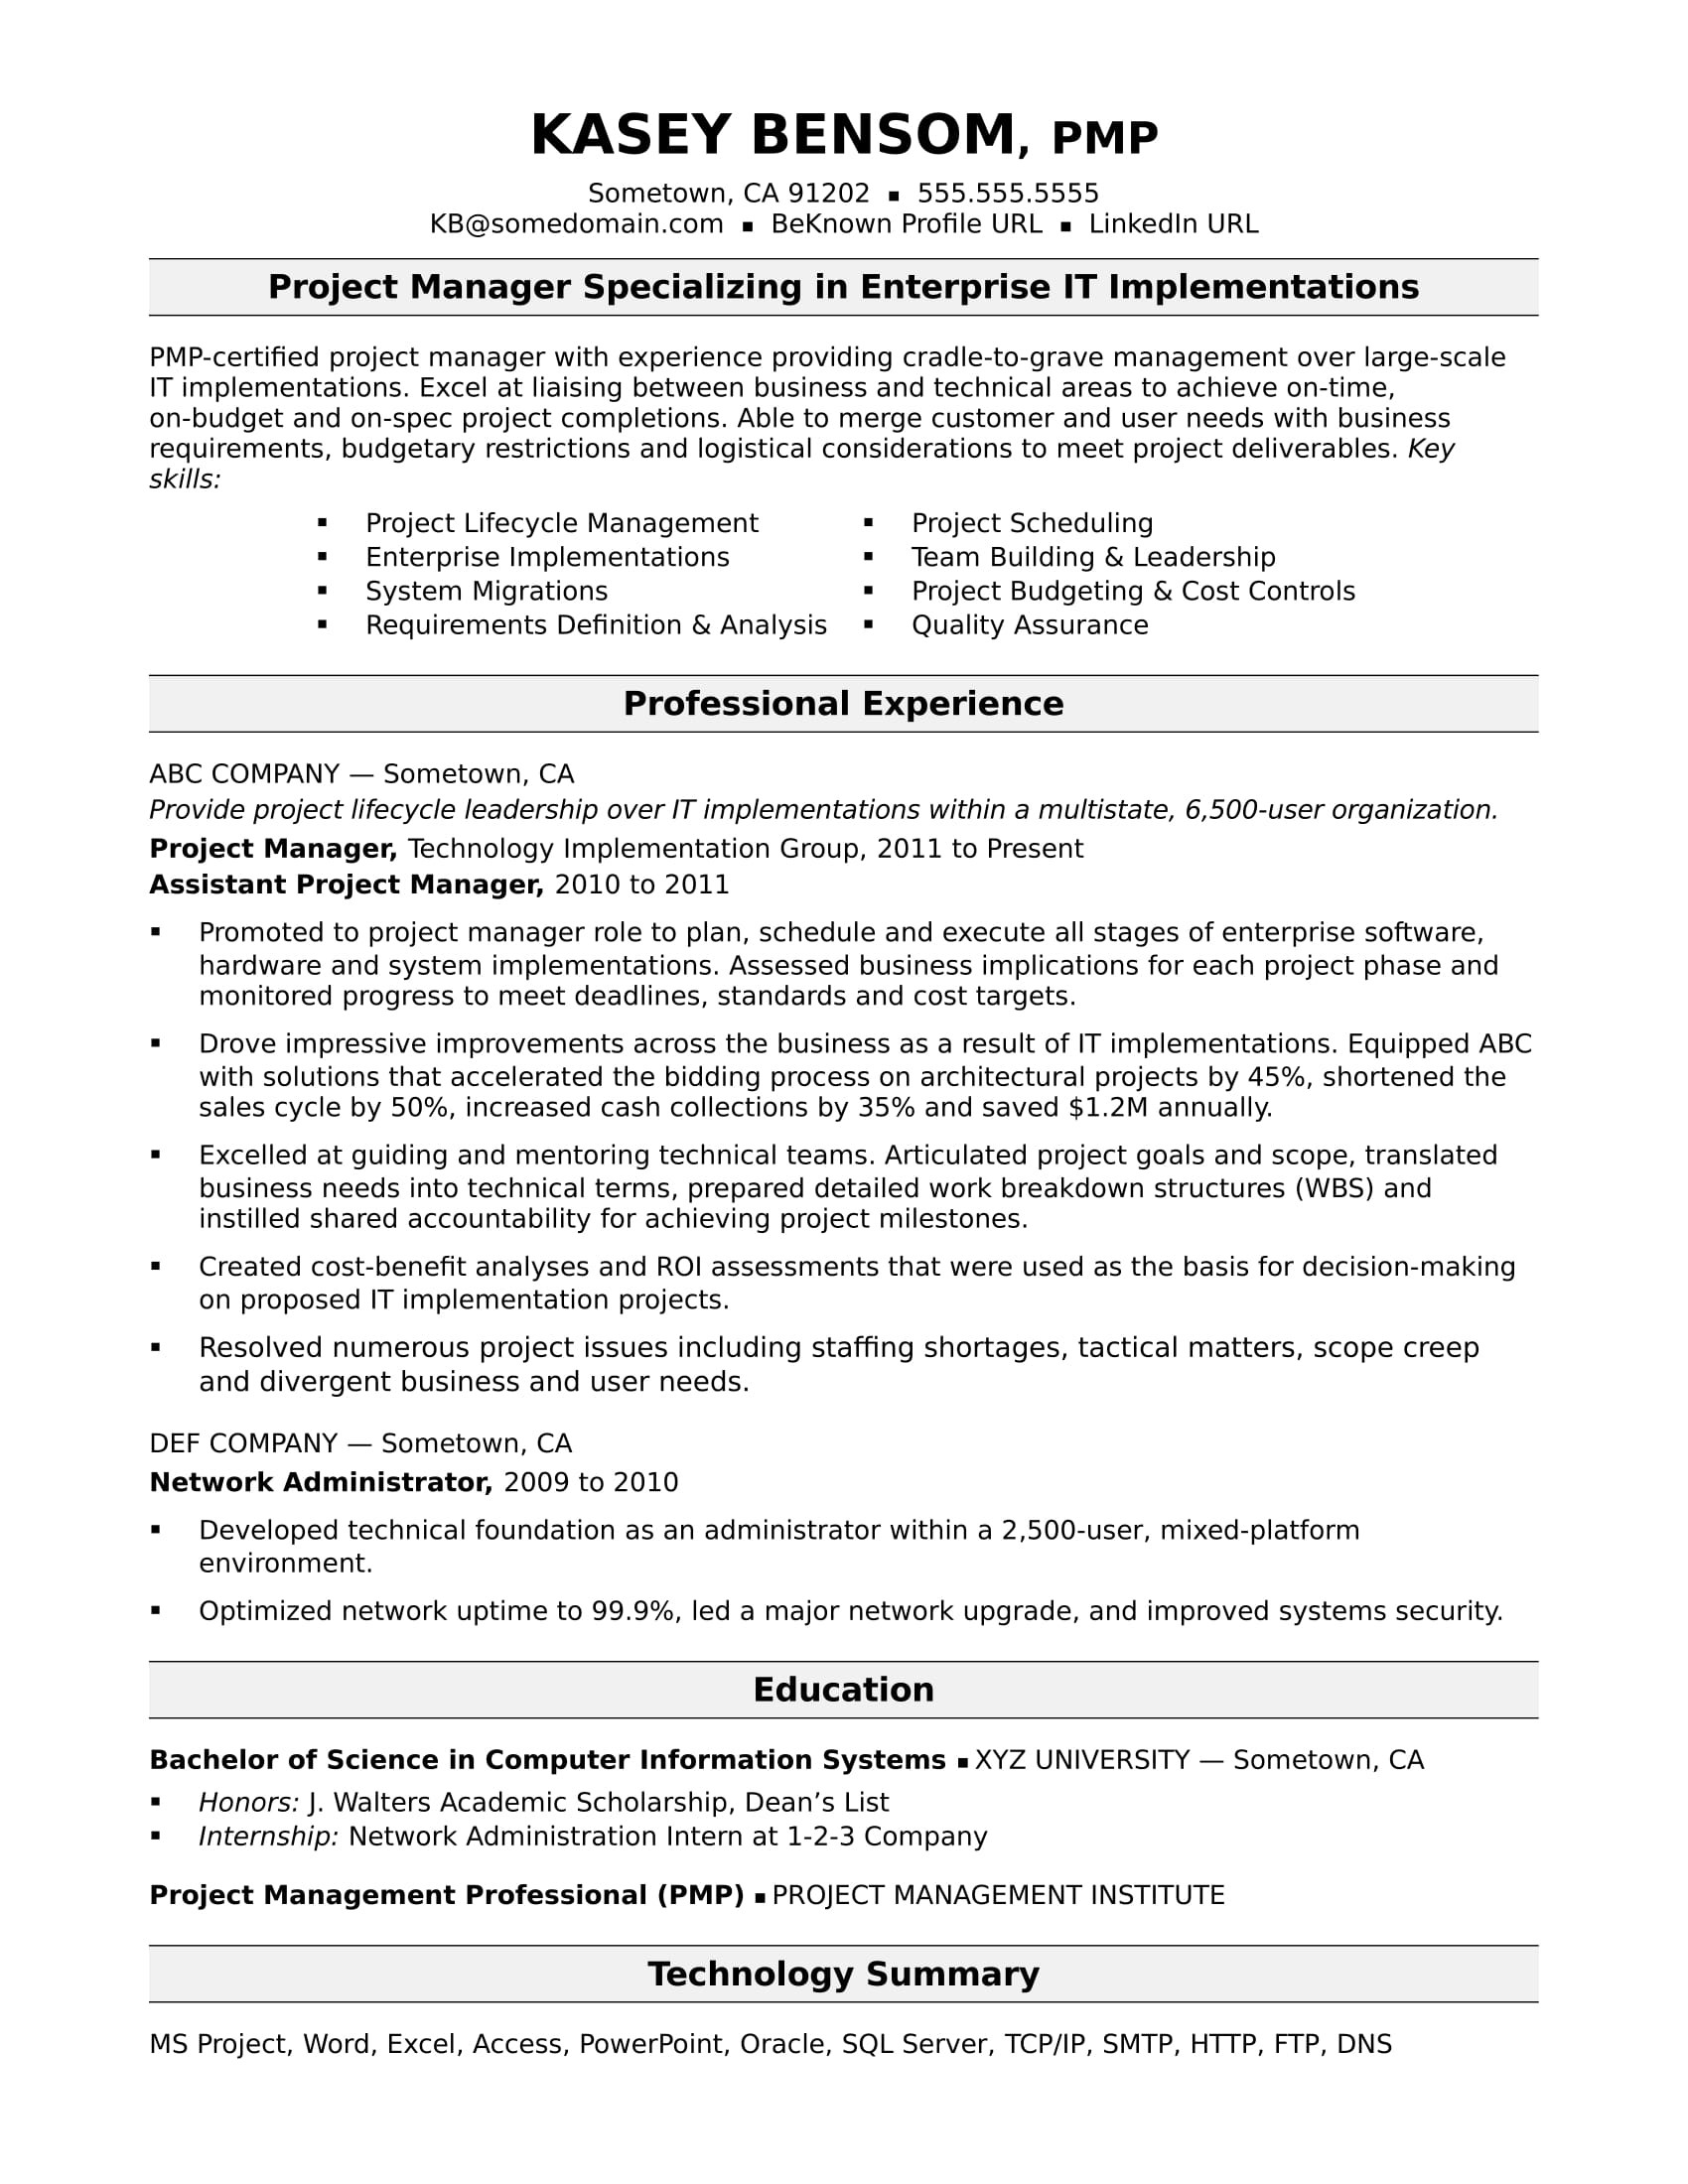 Information Technology Project Manager Resume Sample Midlevel It Project Manager Resume Monster.com